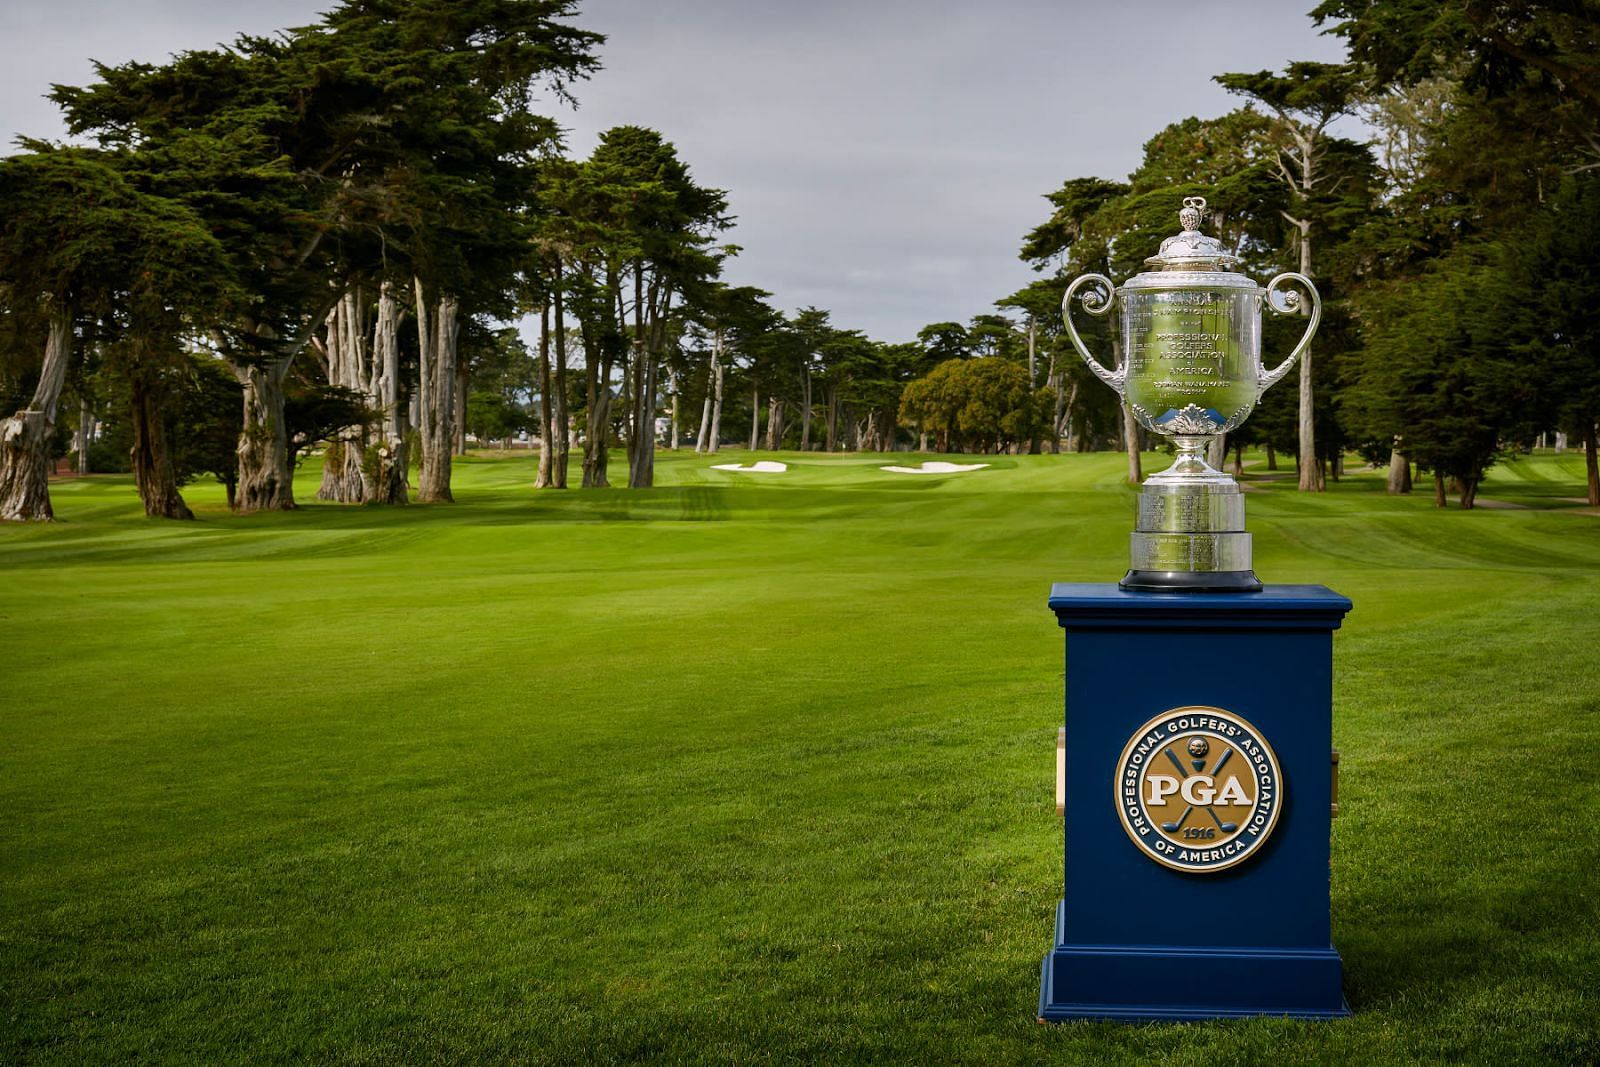 How do you qualify for The PGA championship?